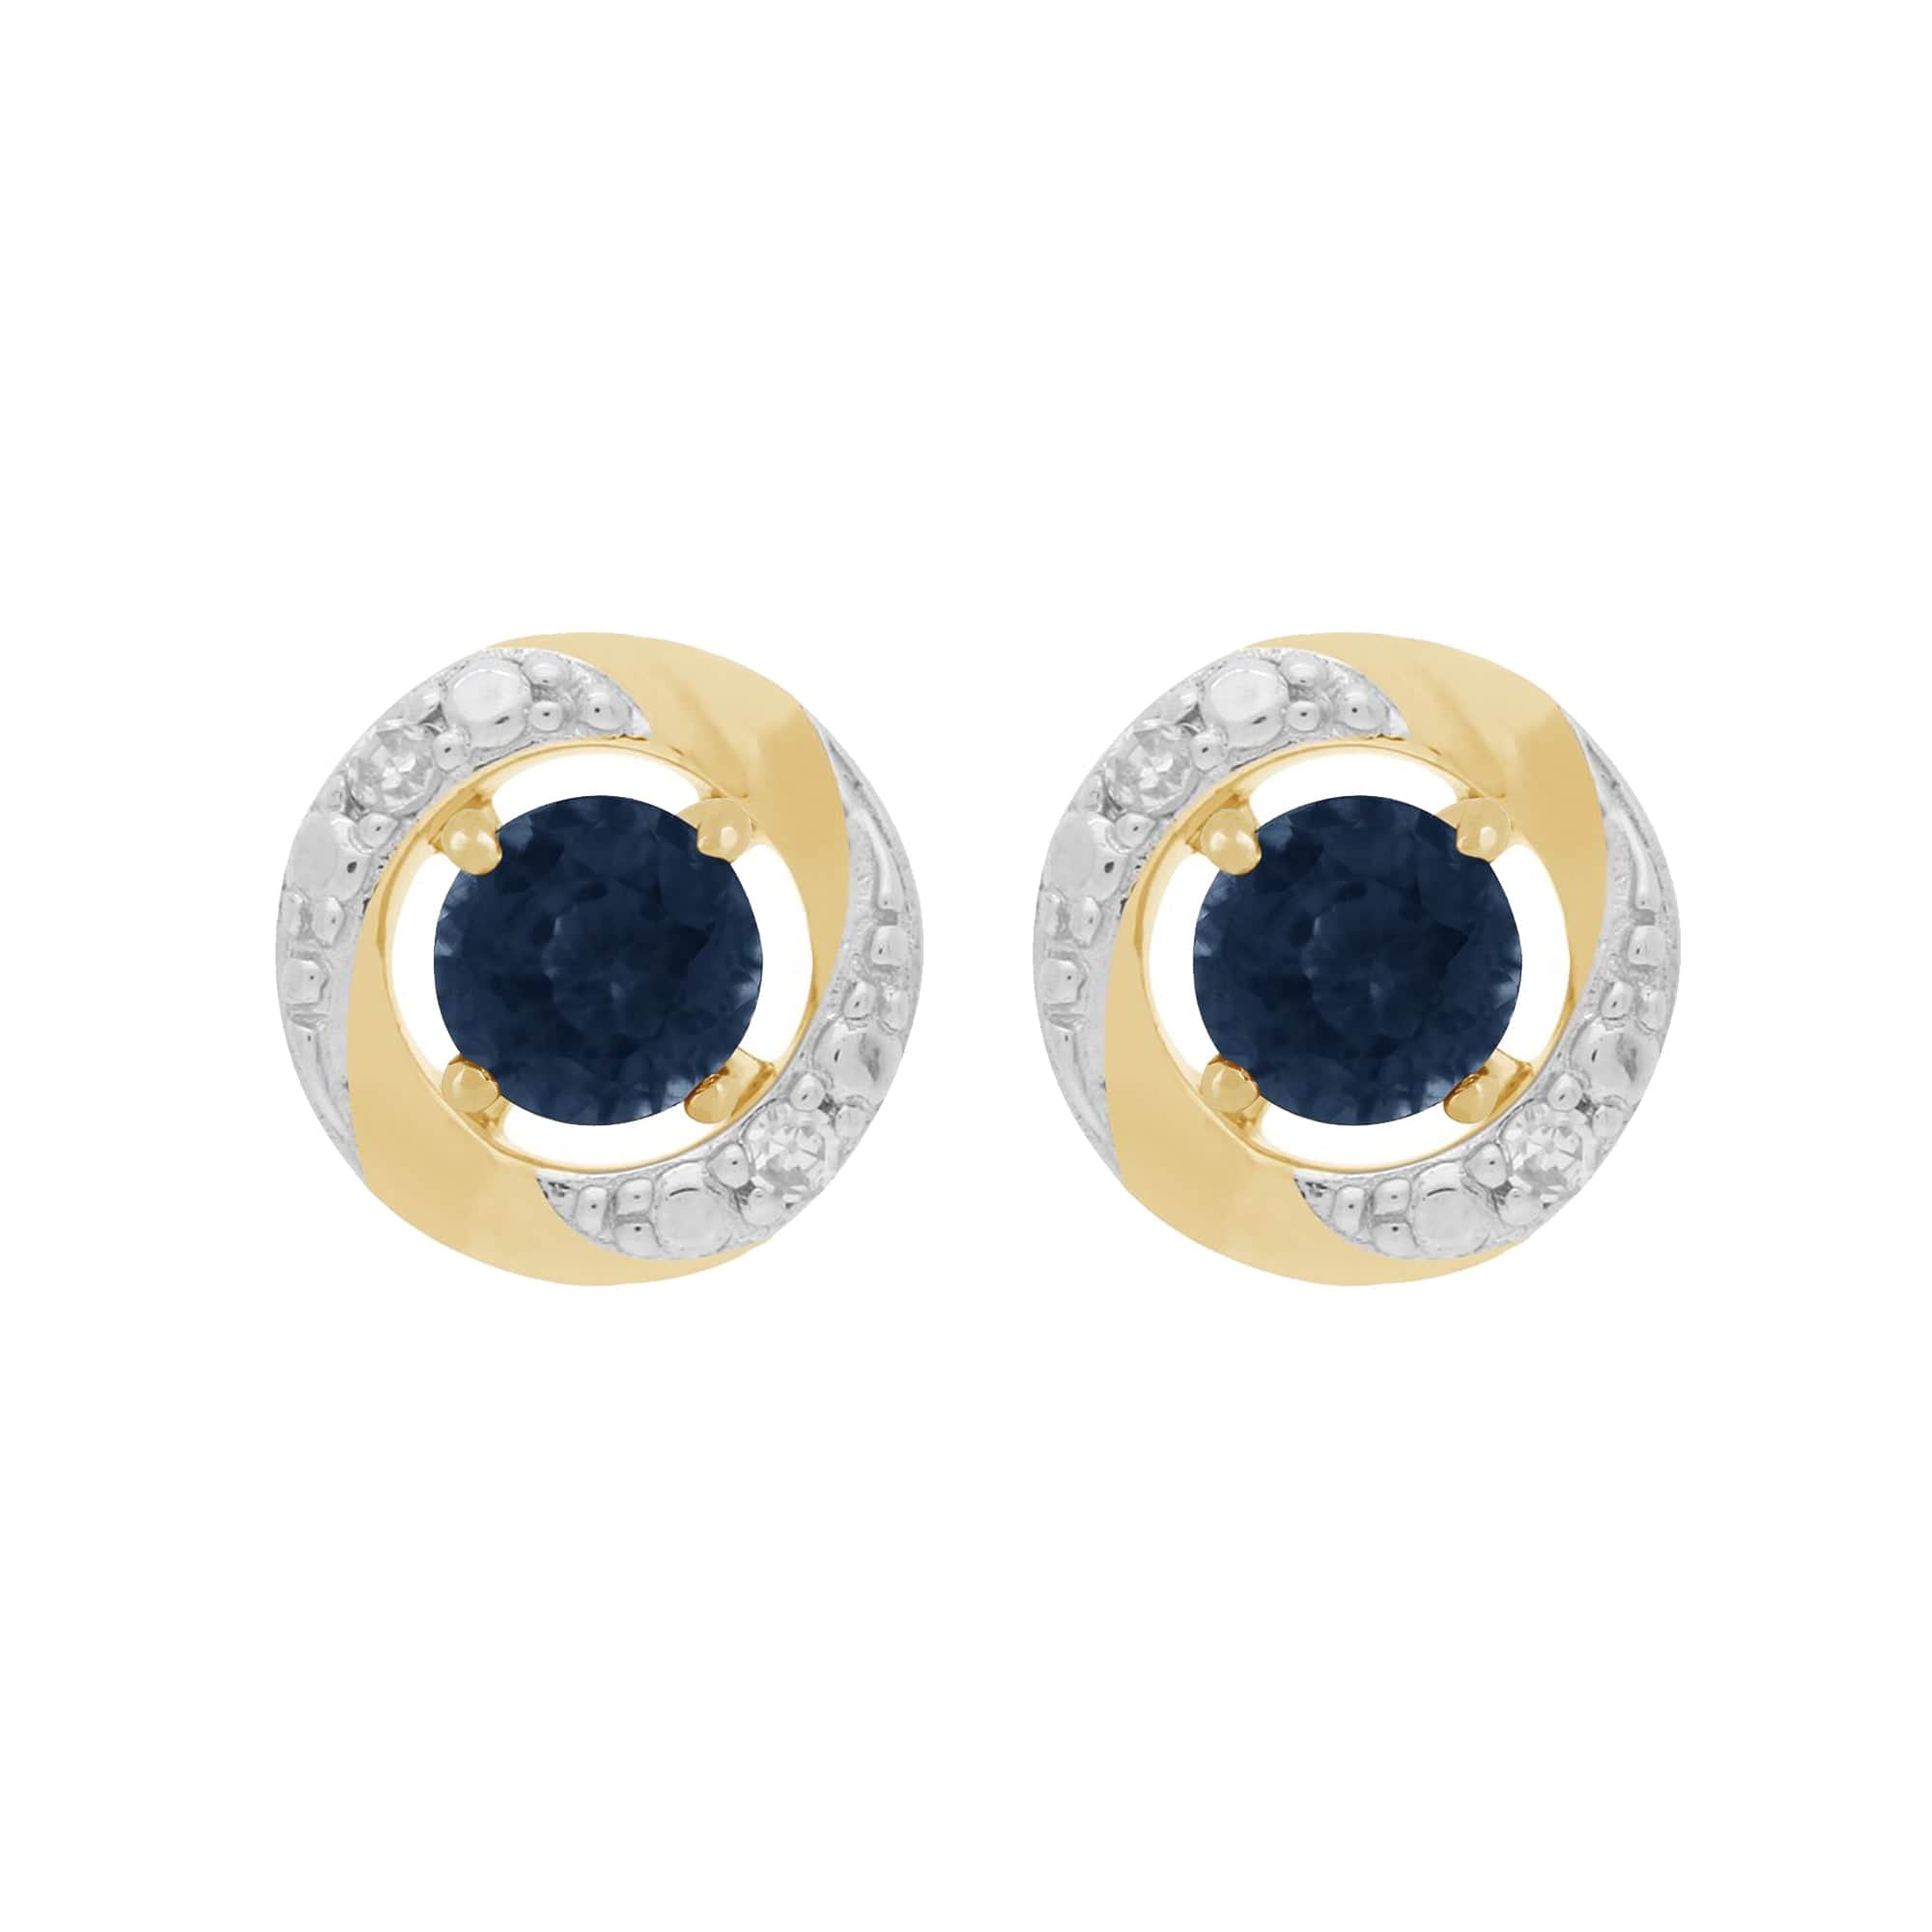 183E0083409-191E0374019 Classic Round Blue Sapphire Stud Earrings with Detachable Diamond Halo Ear Jacket in 9ct Yellow Gold 1